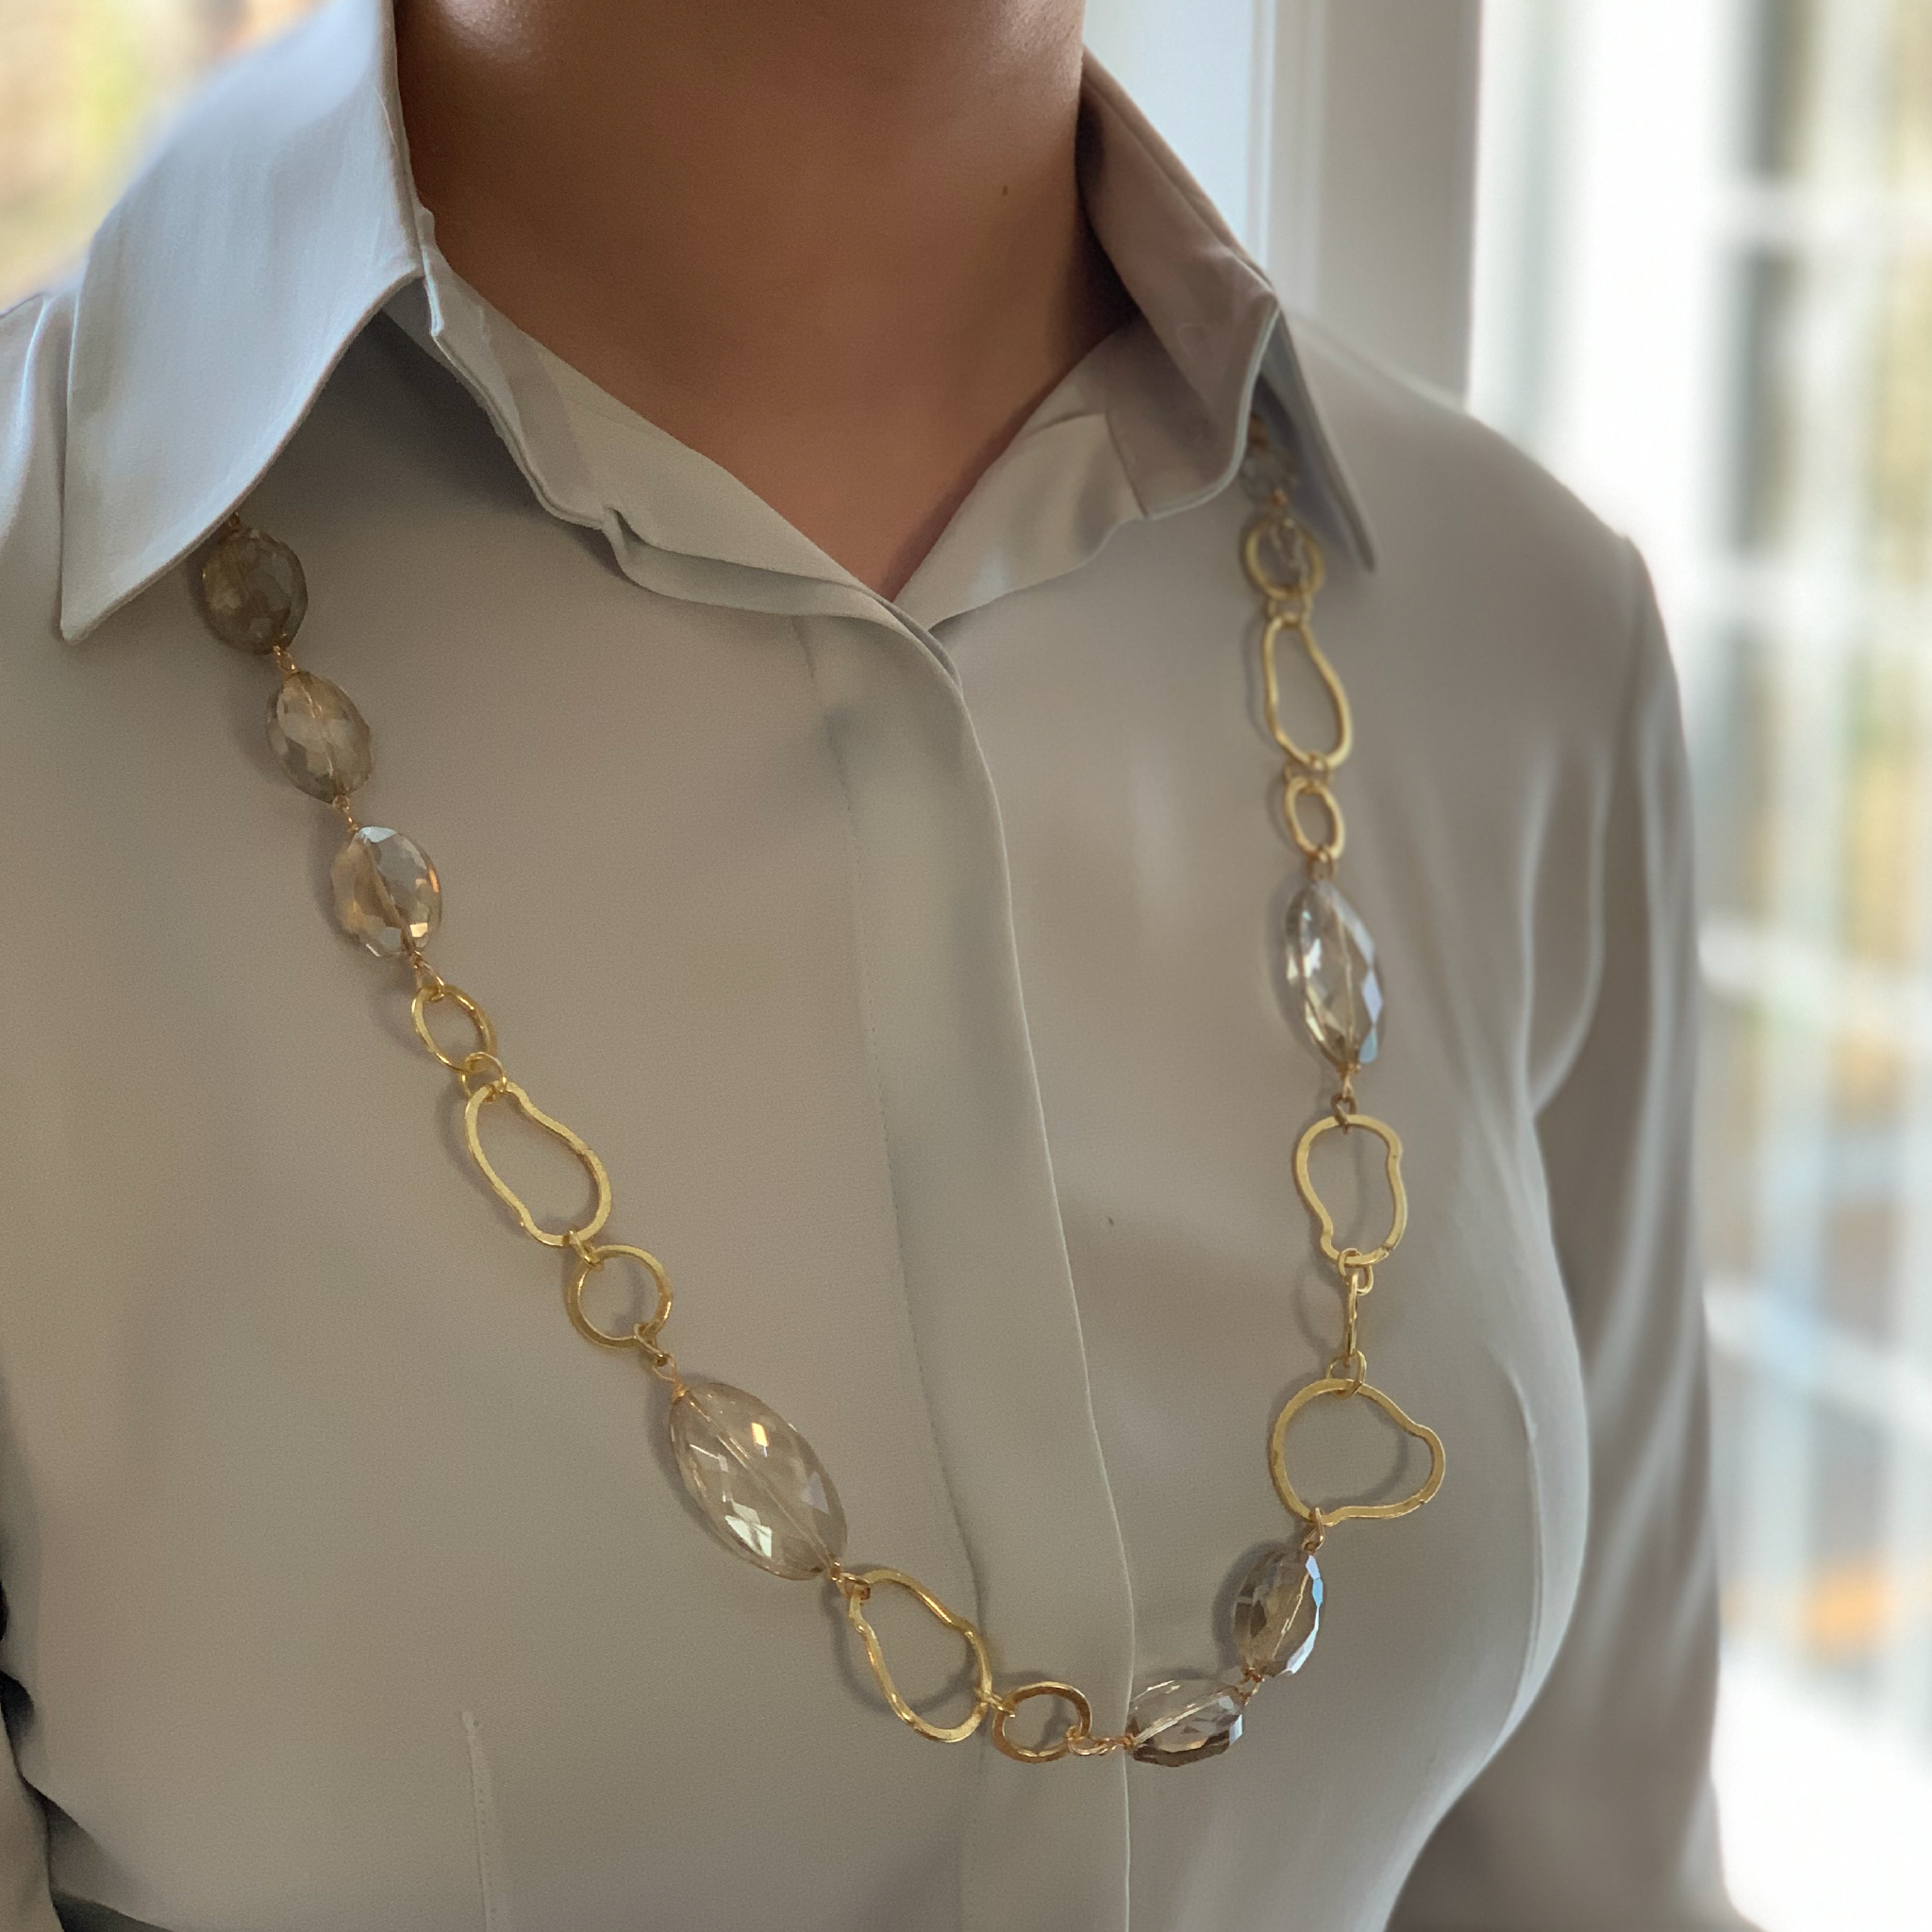 Gold Amoeba Chain Necklace with Champagne Crystal